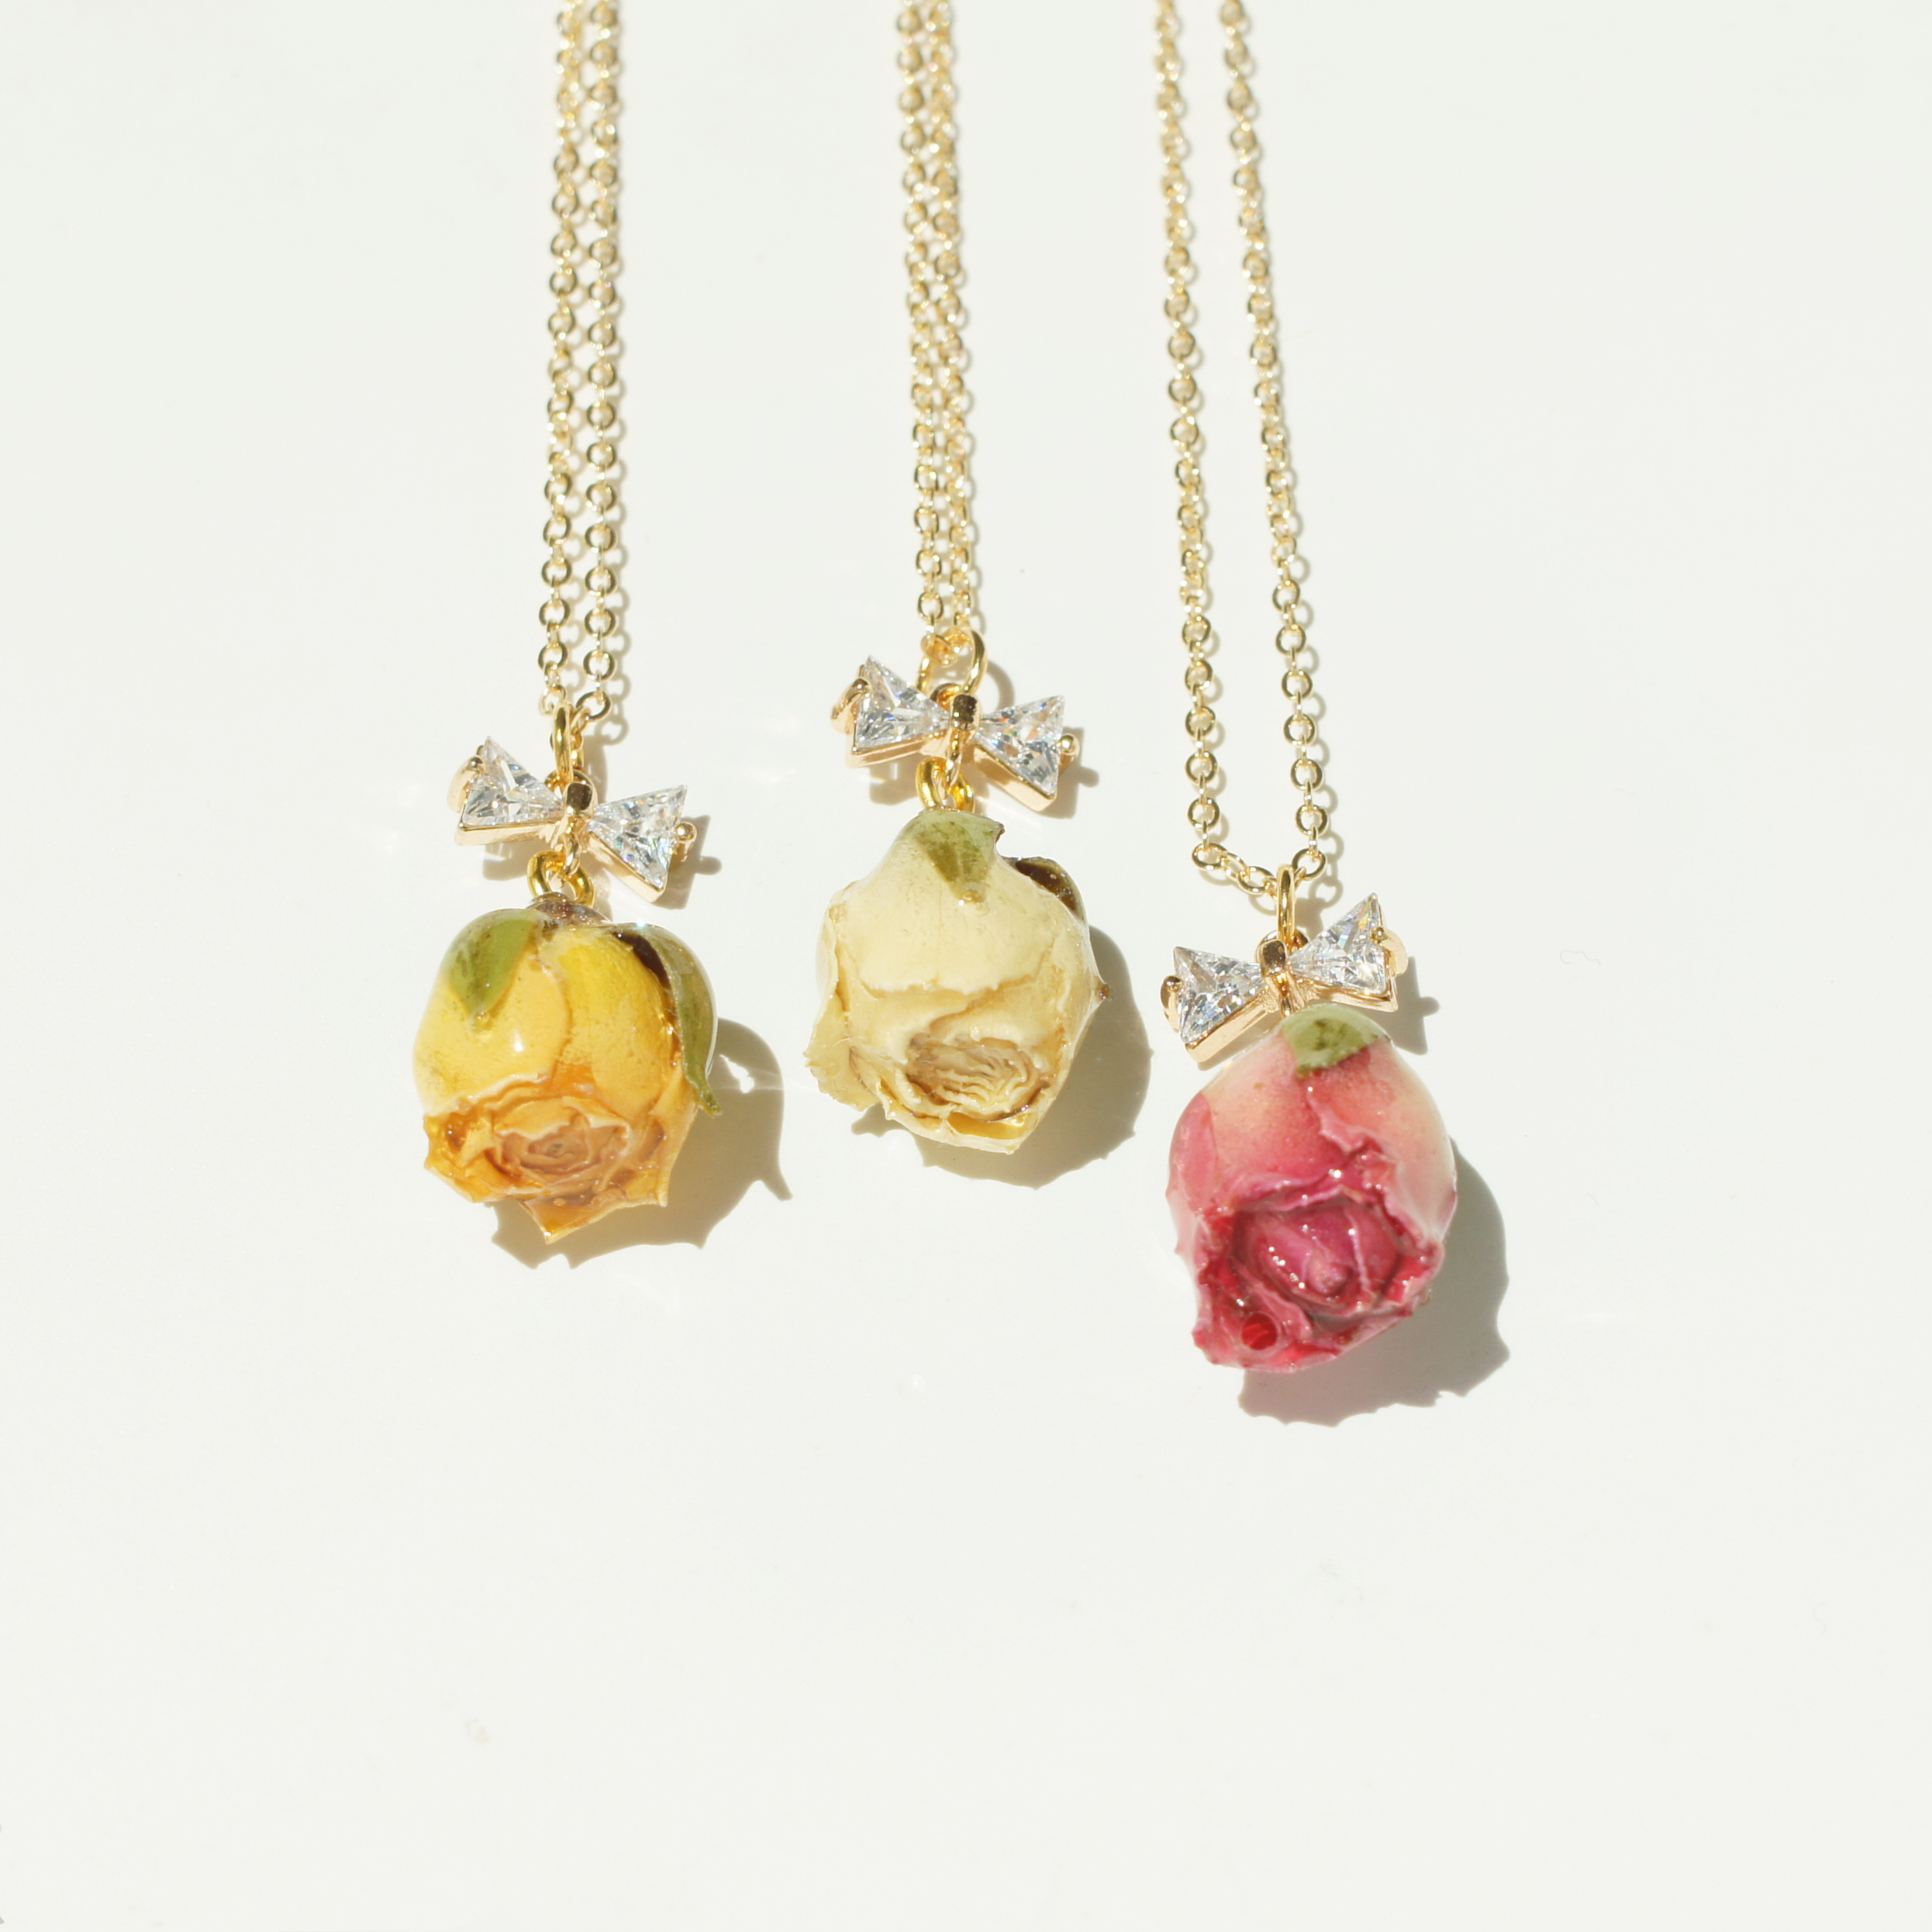 *REAL FLOWER* Rosa Brillante Rosebud Pendant Chain Necklace with Crystal Bow